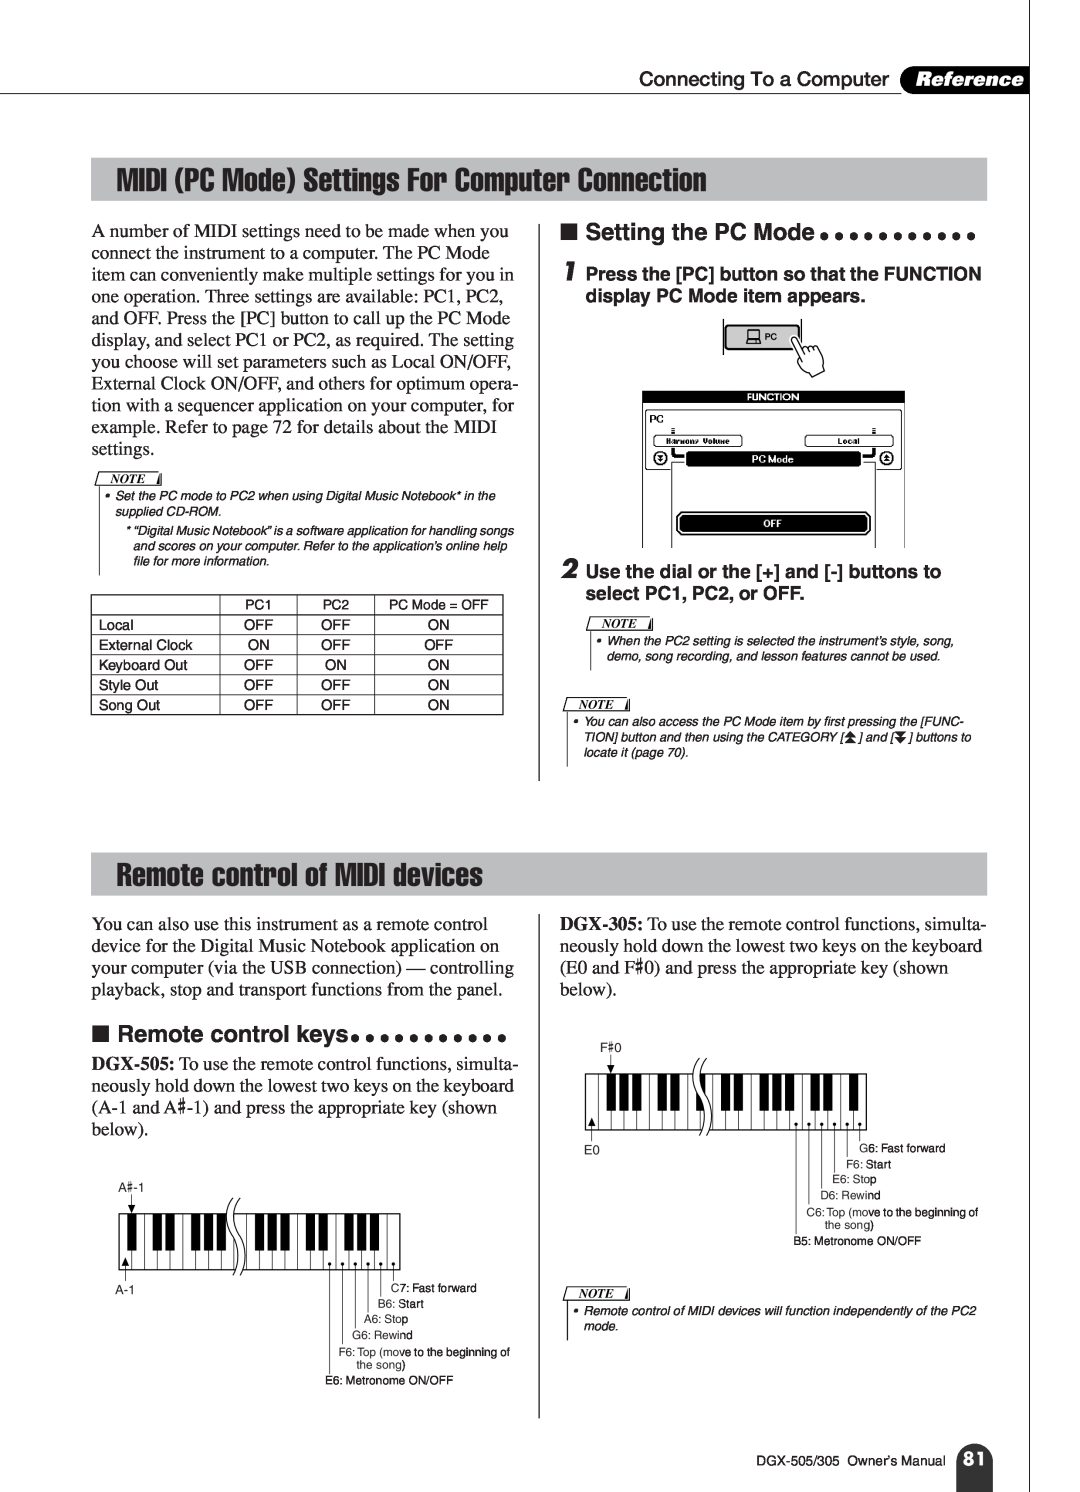 Yamaha DGX-305, DGX-505 manual MIDI PC Mode Settings For Computer Connection, Remote control of MIDI devices 